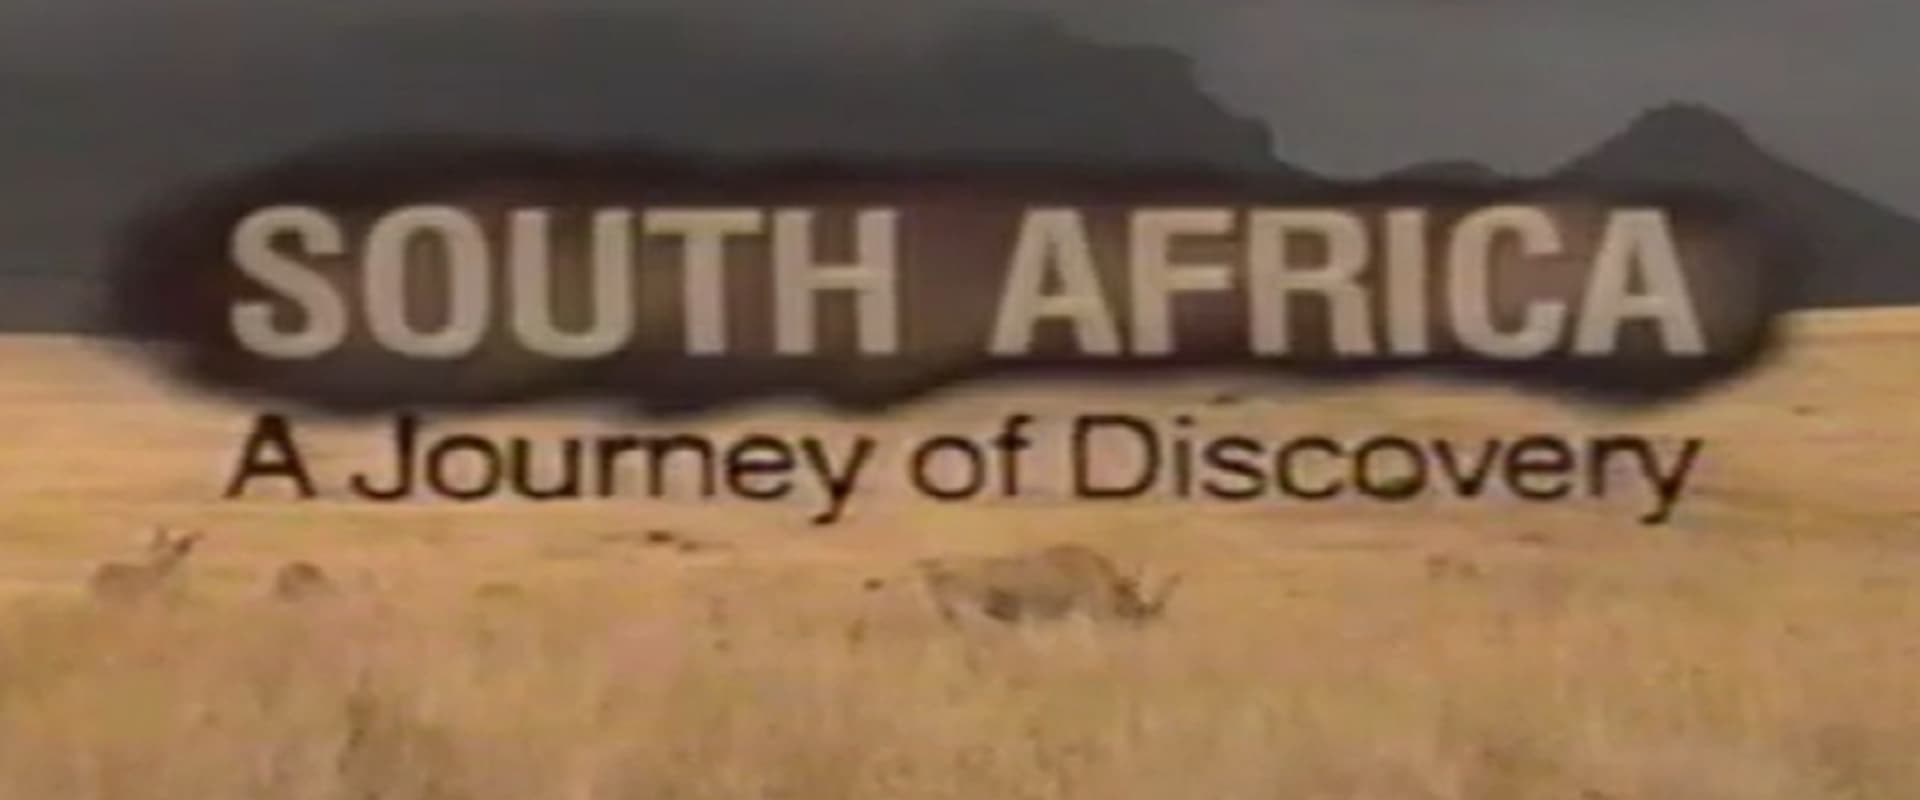 South Africa: A Journey of Discovery